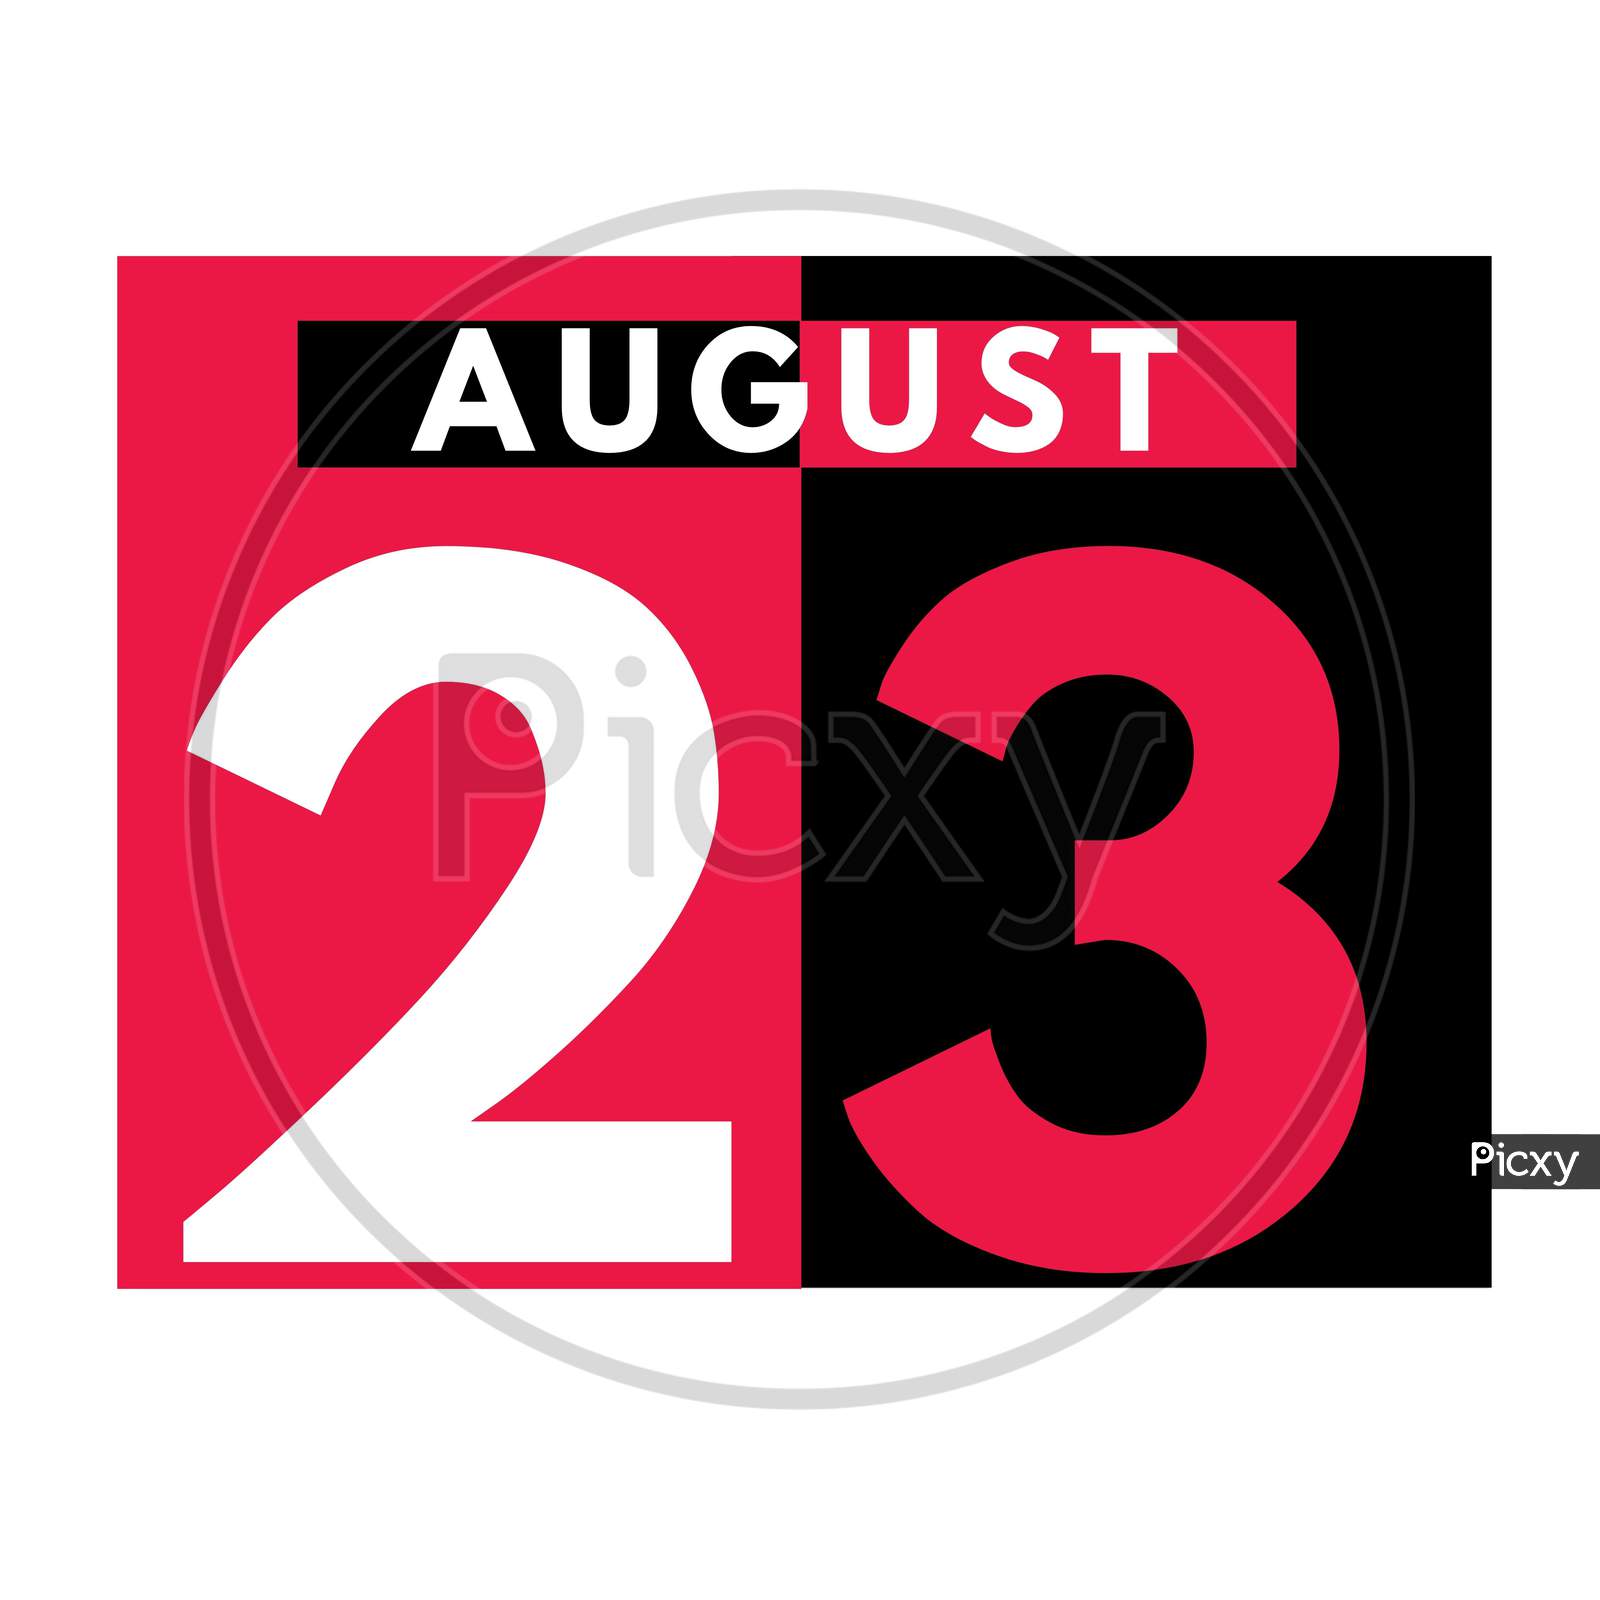 August 23 . Modern Daily Calendar Icon .Date ,Day, Month .Calendar For The Month Of August